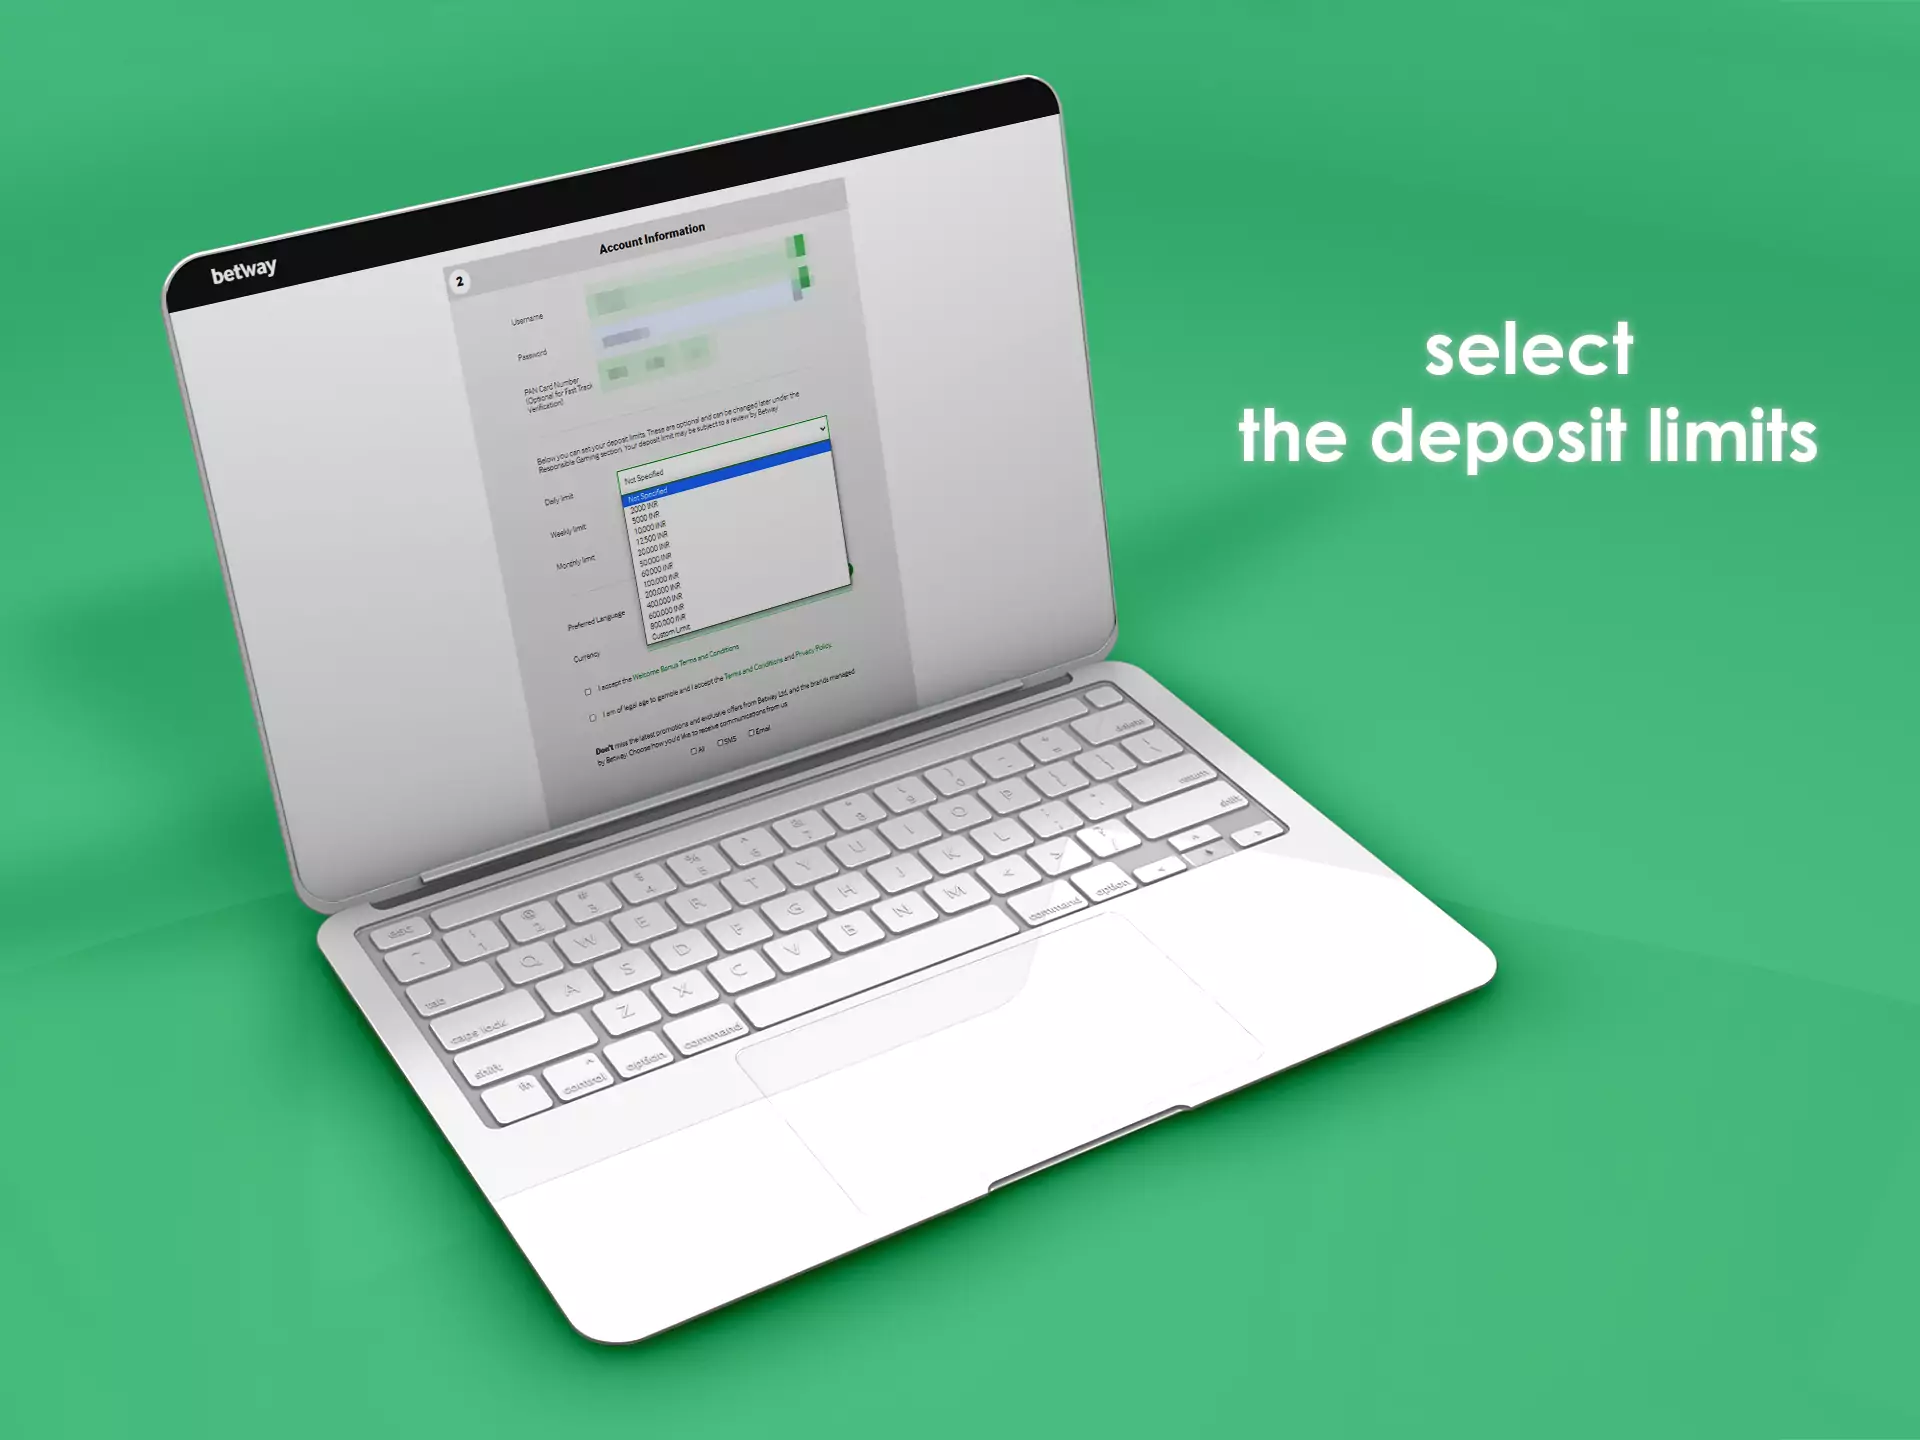 In the Account Information section, you can set up daily, weekly and monthly deposits.